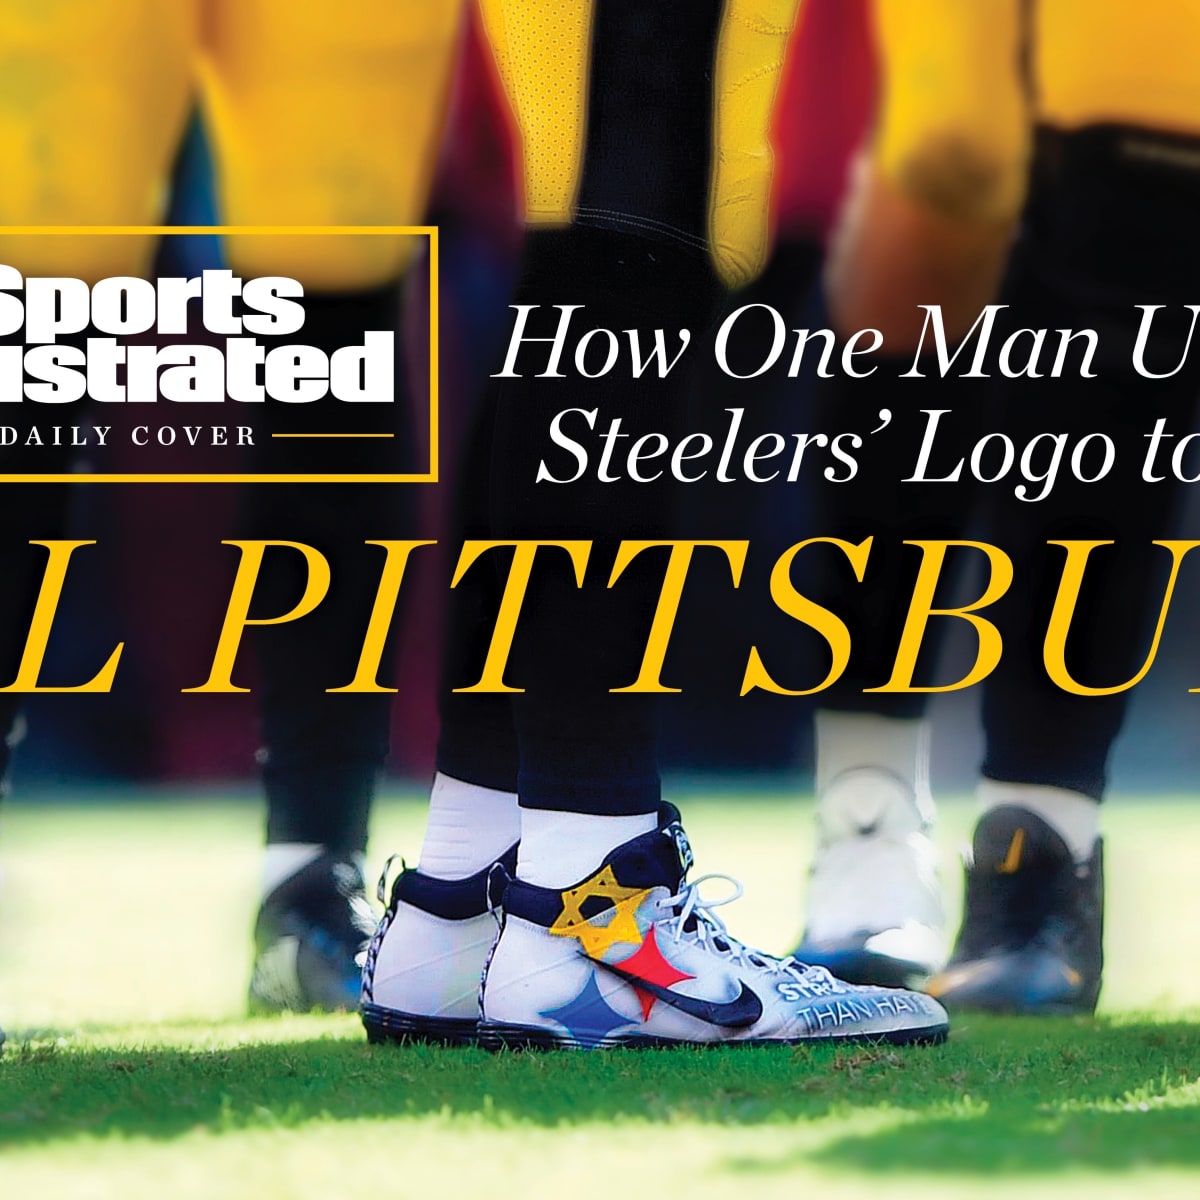 How the Steelers' logo helped heal Pittsburgh after the Tree of Life  shooting - Sports Illustrated